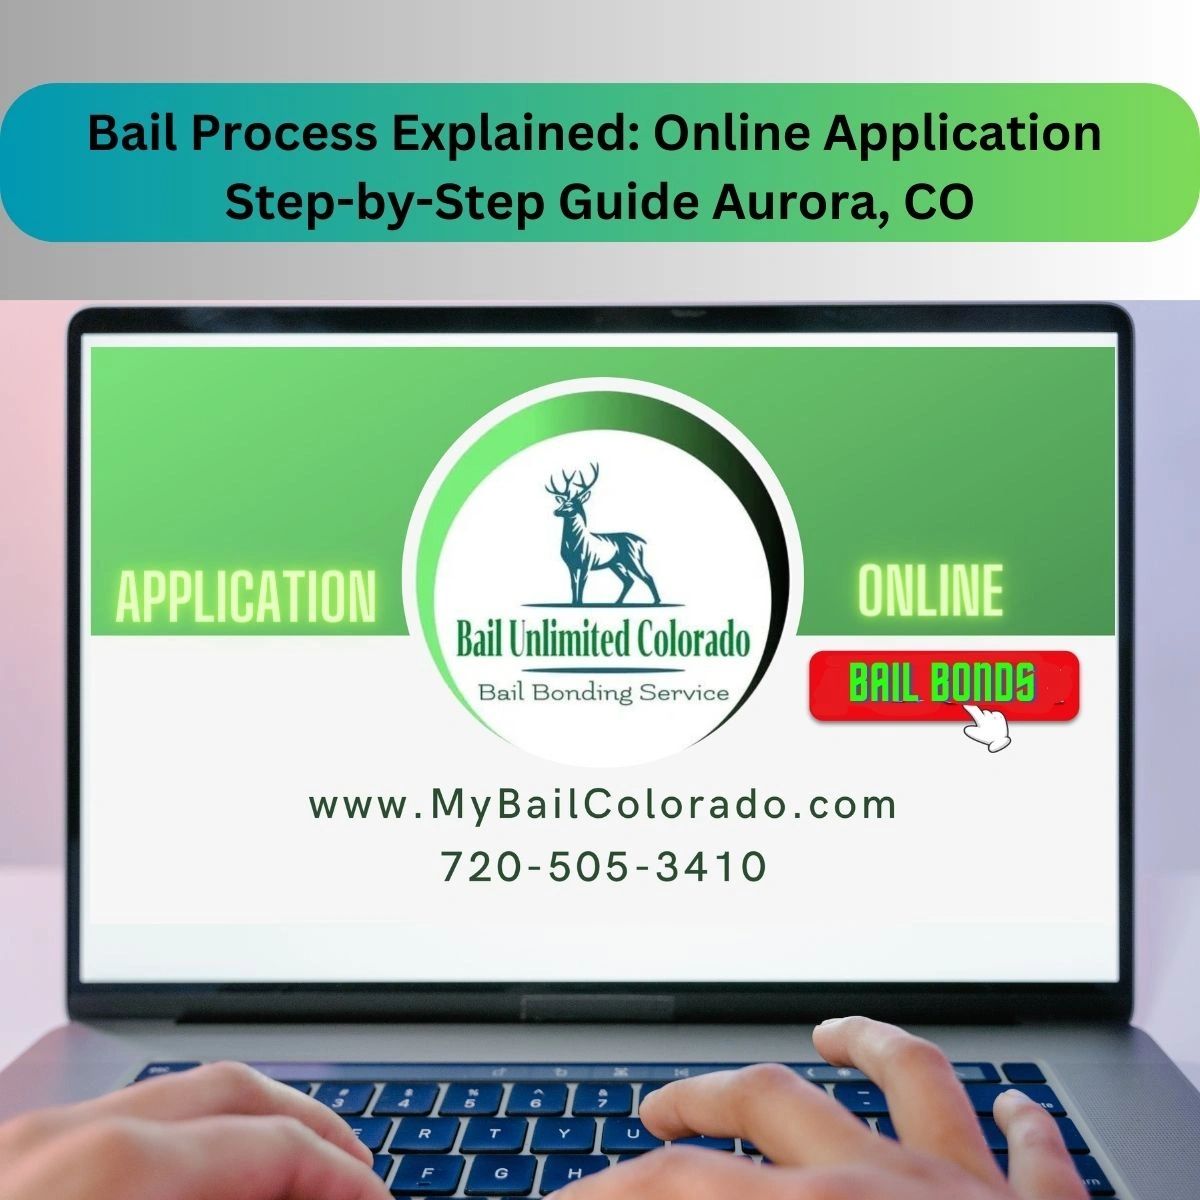 Bail Bonds 101 - Bail Process Explained: Online Application Step-by-Step Guide Aurora CO. By Author: Paul Trujillo Publisher: Bail Unlimited Colorado